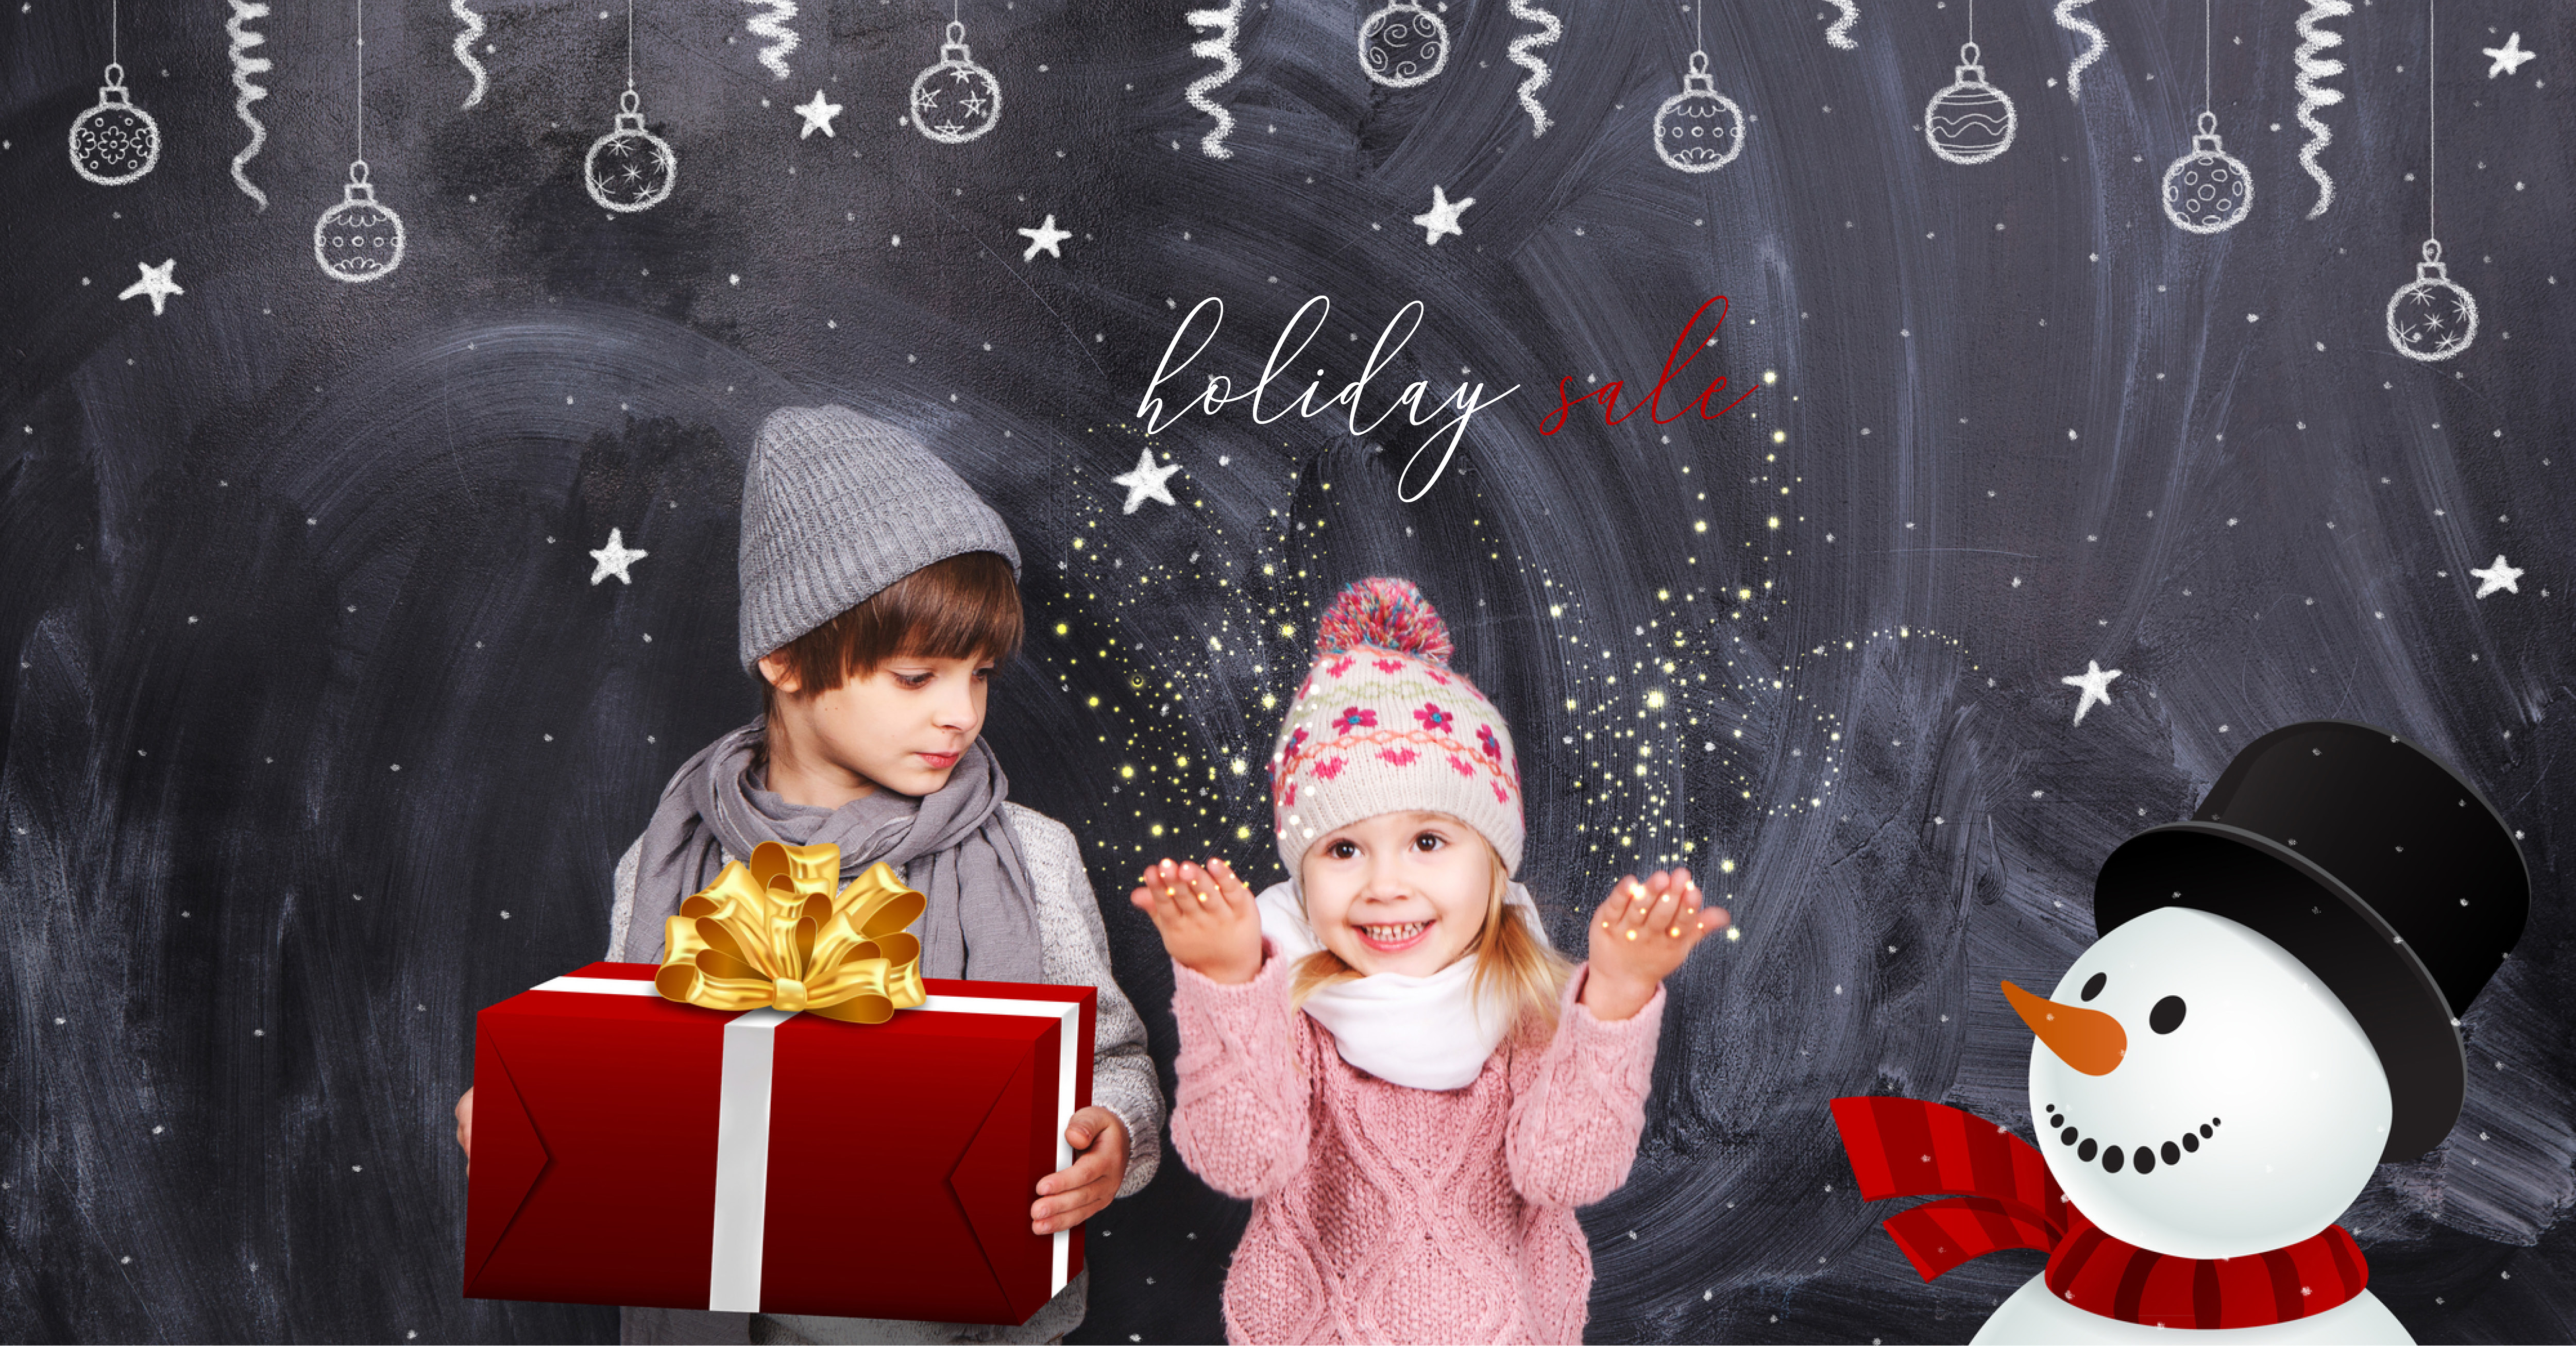 3 Top Holiday Advertising Techniques